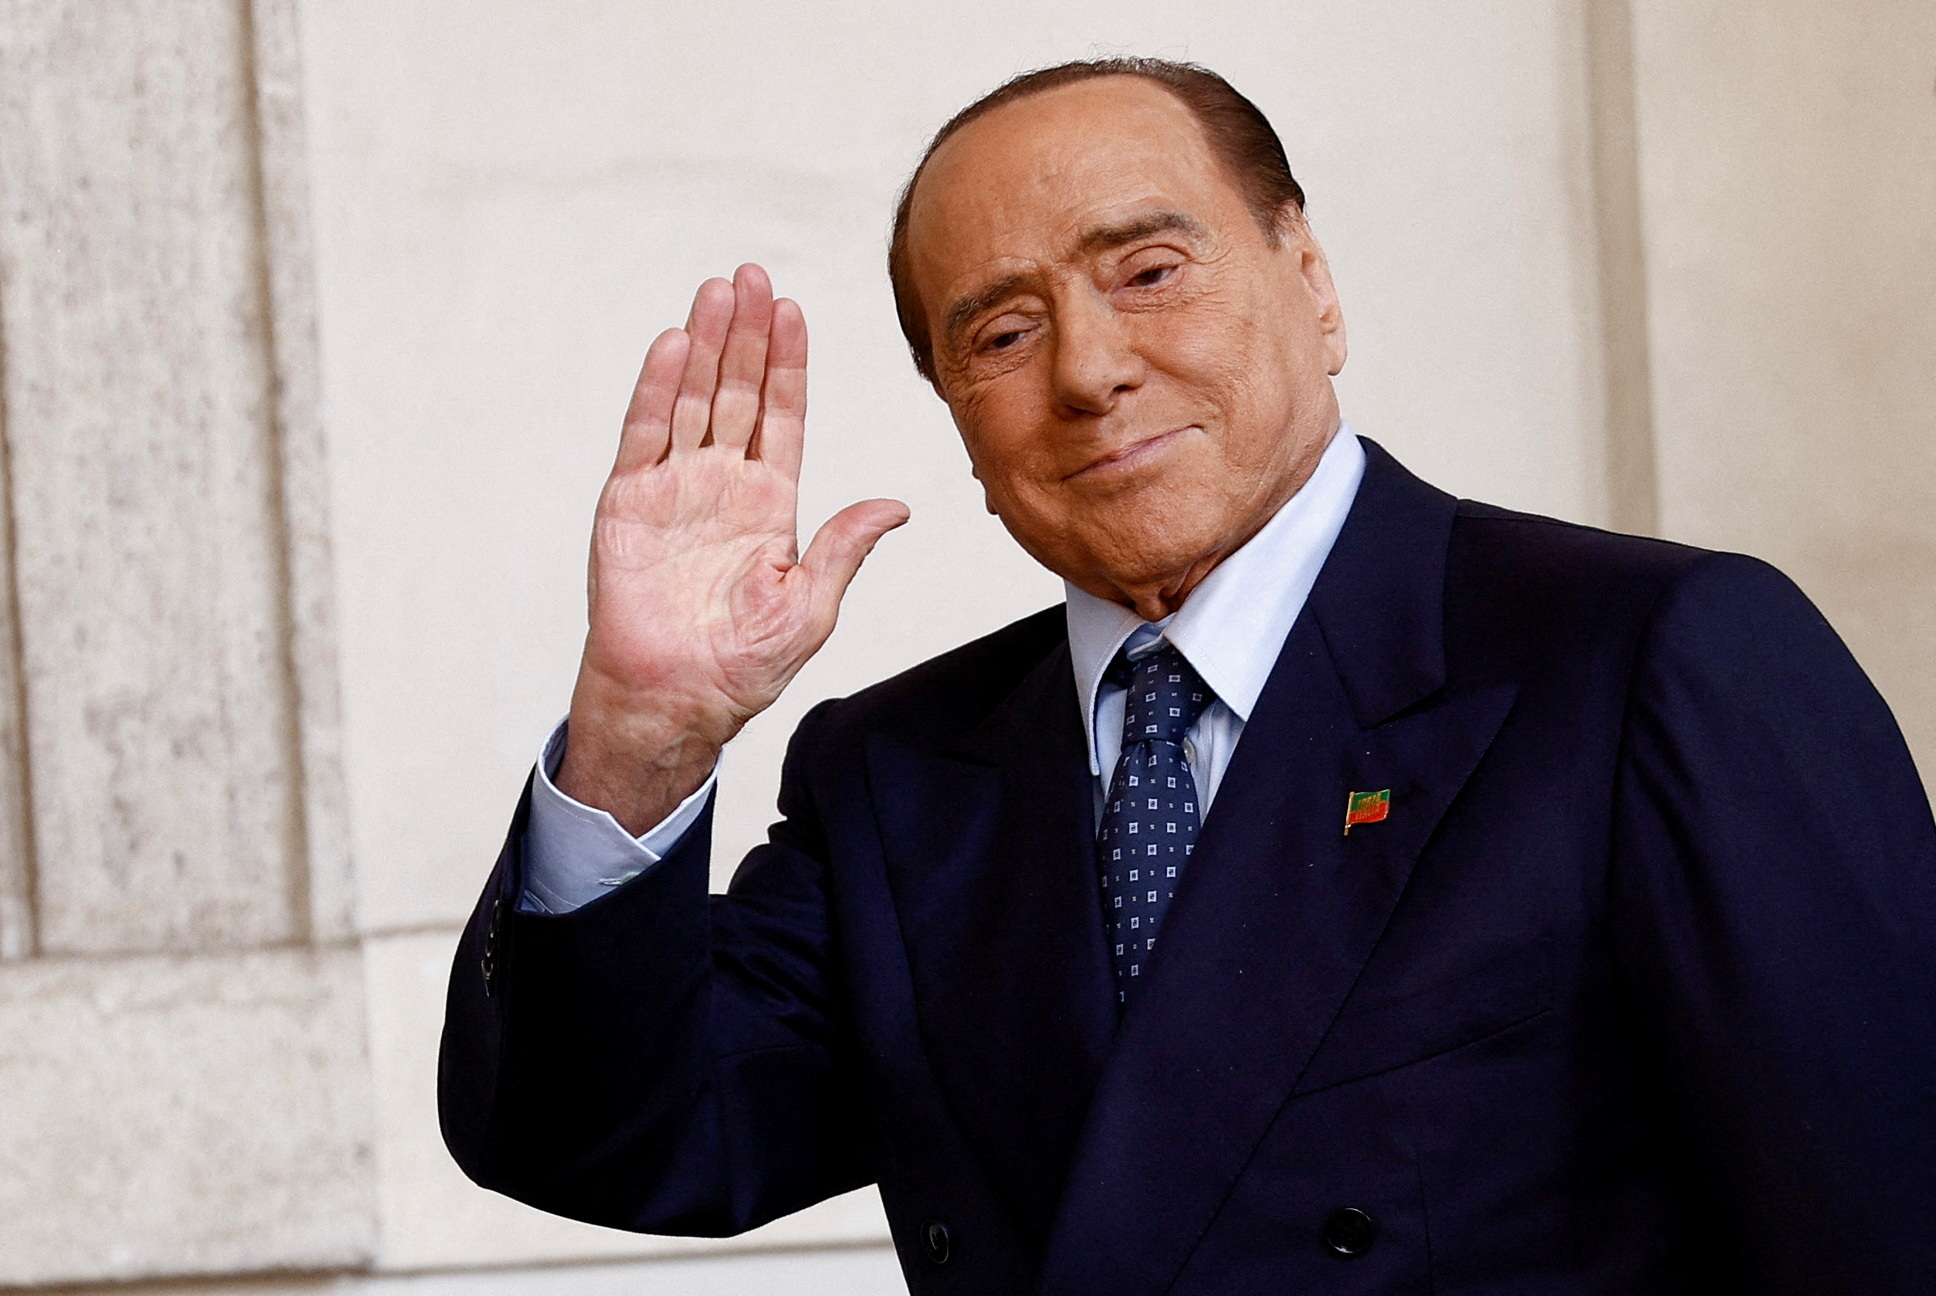 FILE PHOTO: Forza Italia leader and former Prime Minister Silvio Berlusconi arrives for a meeting with Italian President Sergio Mattarella at the Quirinale Palace in Rome, Italy October 21, 2022.